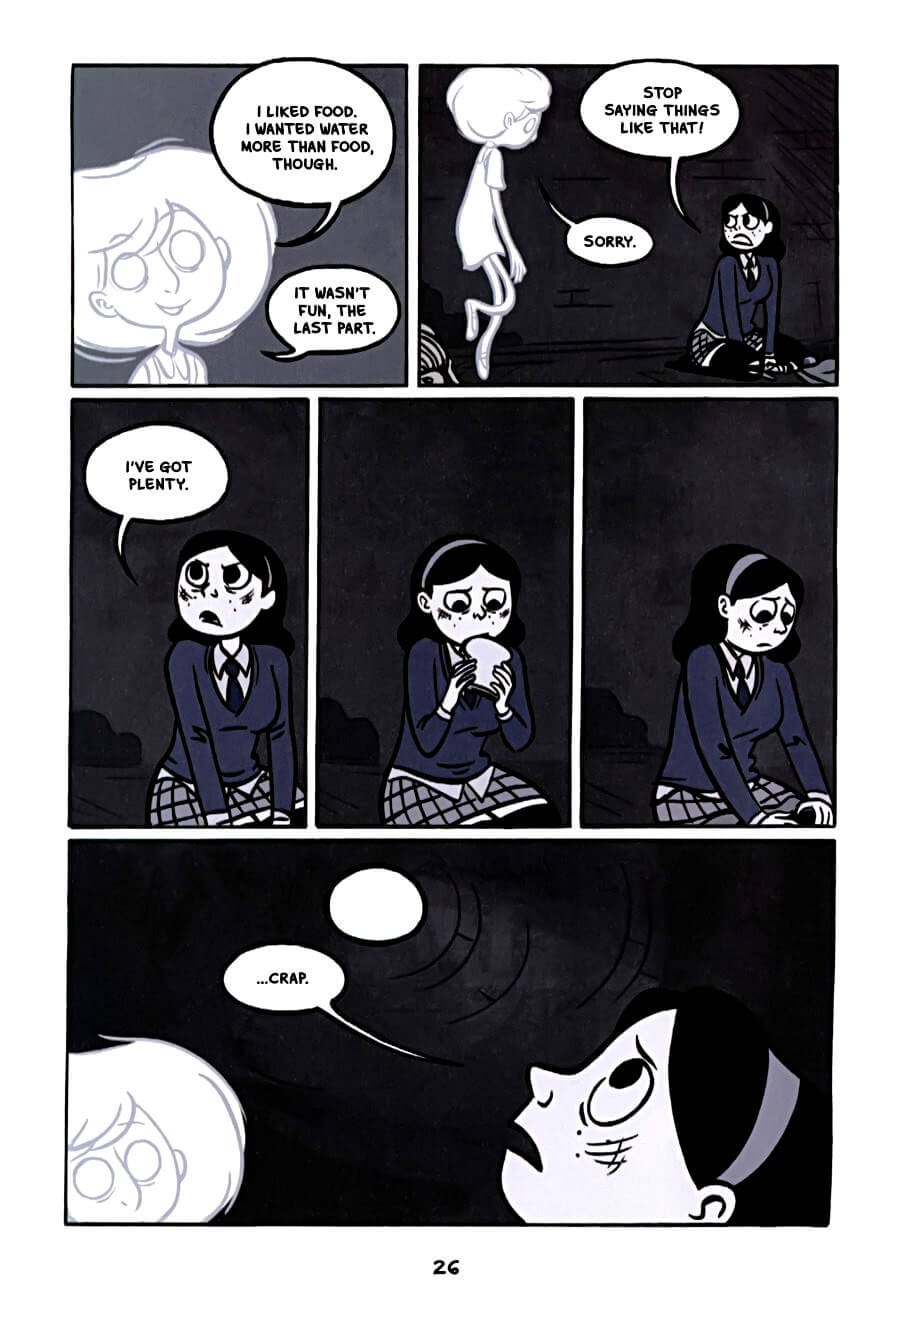 page 26 of anya's ghost graphic novel